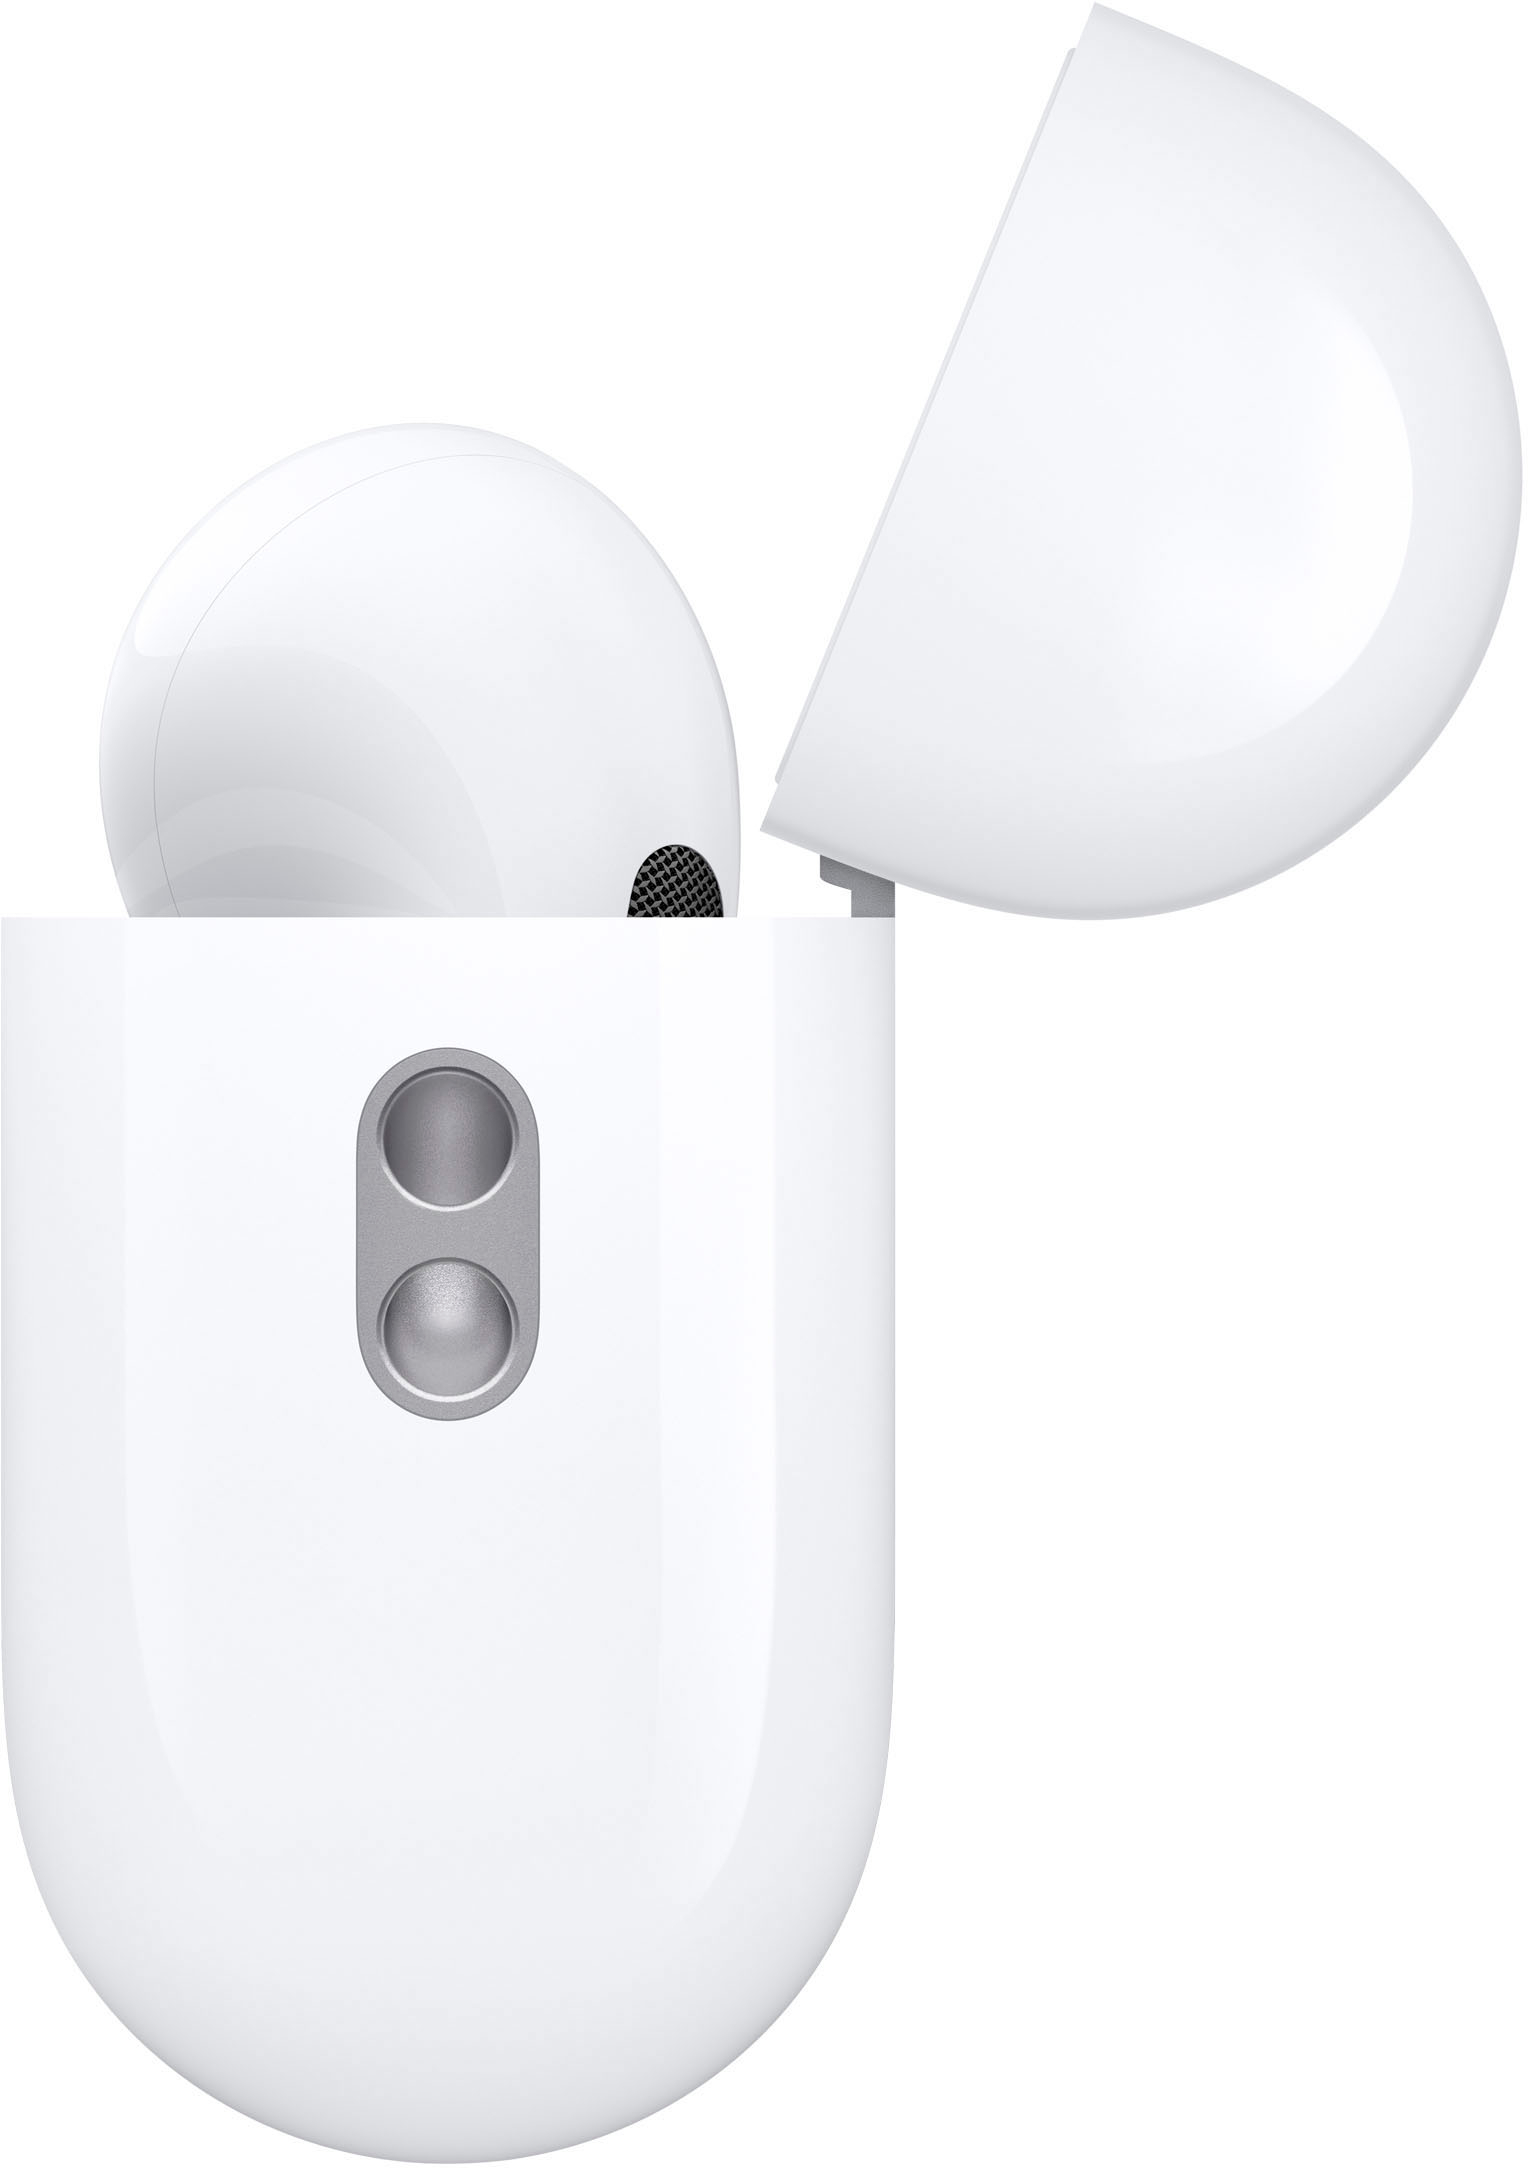 Apple AirPods Pro – UCF Technology Product Center